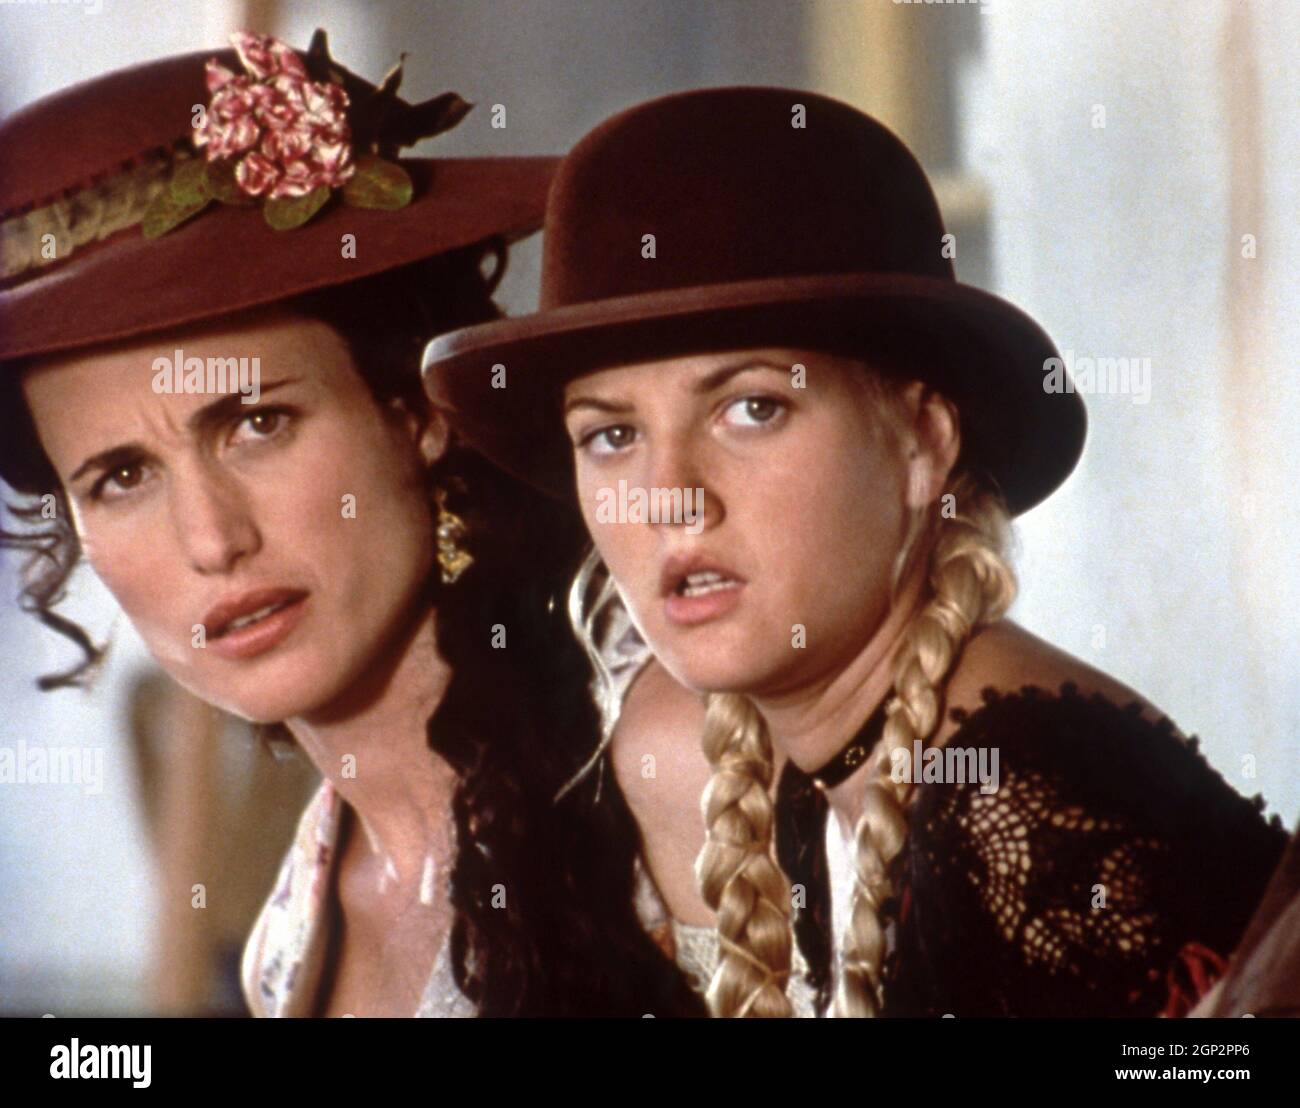 BAD GIRLS, from left: Andie MacDowell, Drew Barrymore, 1994. TM & Copyright ©20th Century Fox Film Corp. / Courtesy Everett Collection Stock Photo